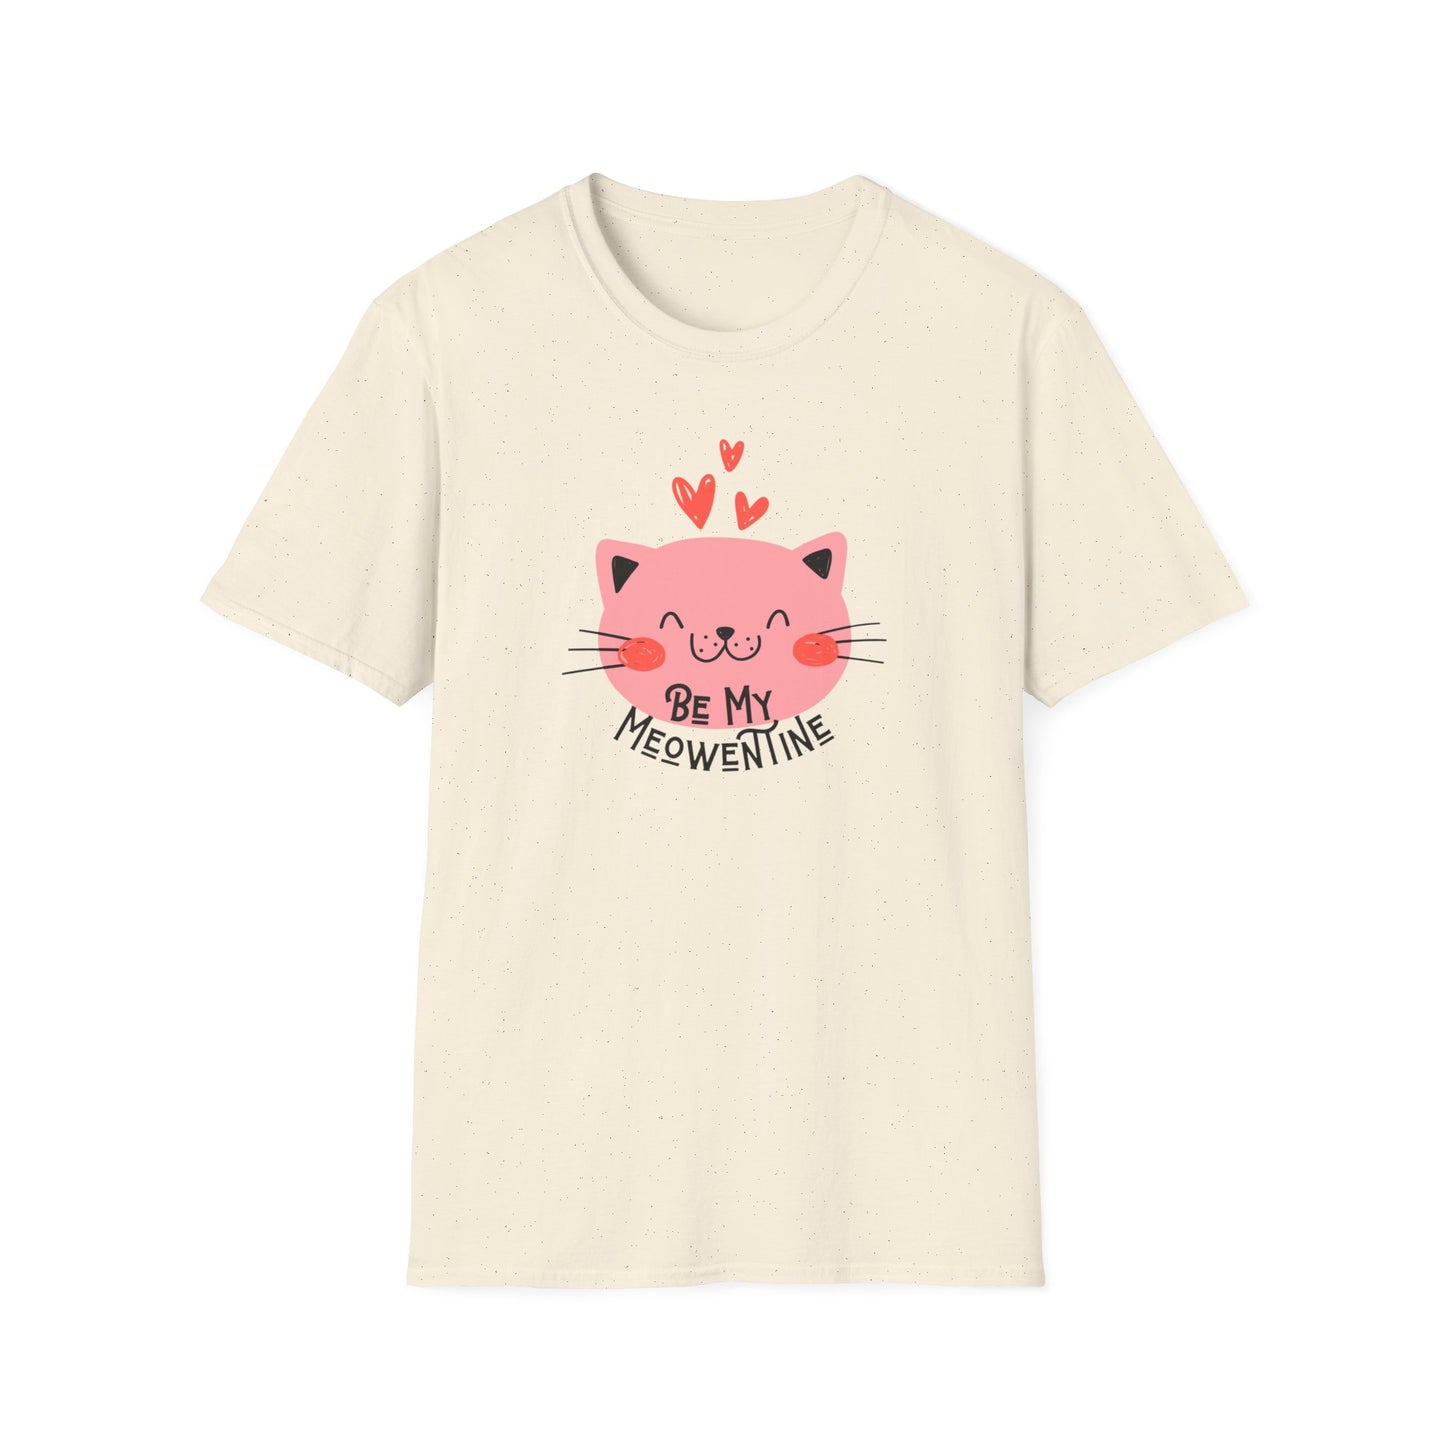 Be My Meowentine Unisex Softstyle T-Shirt, Cat Valentines Day T-Shirt, Gift for Her or Him for Valentines Day